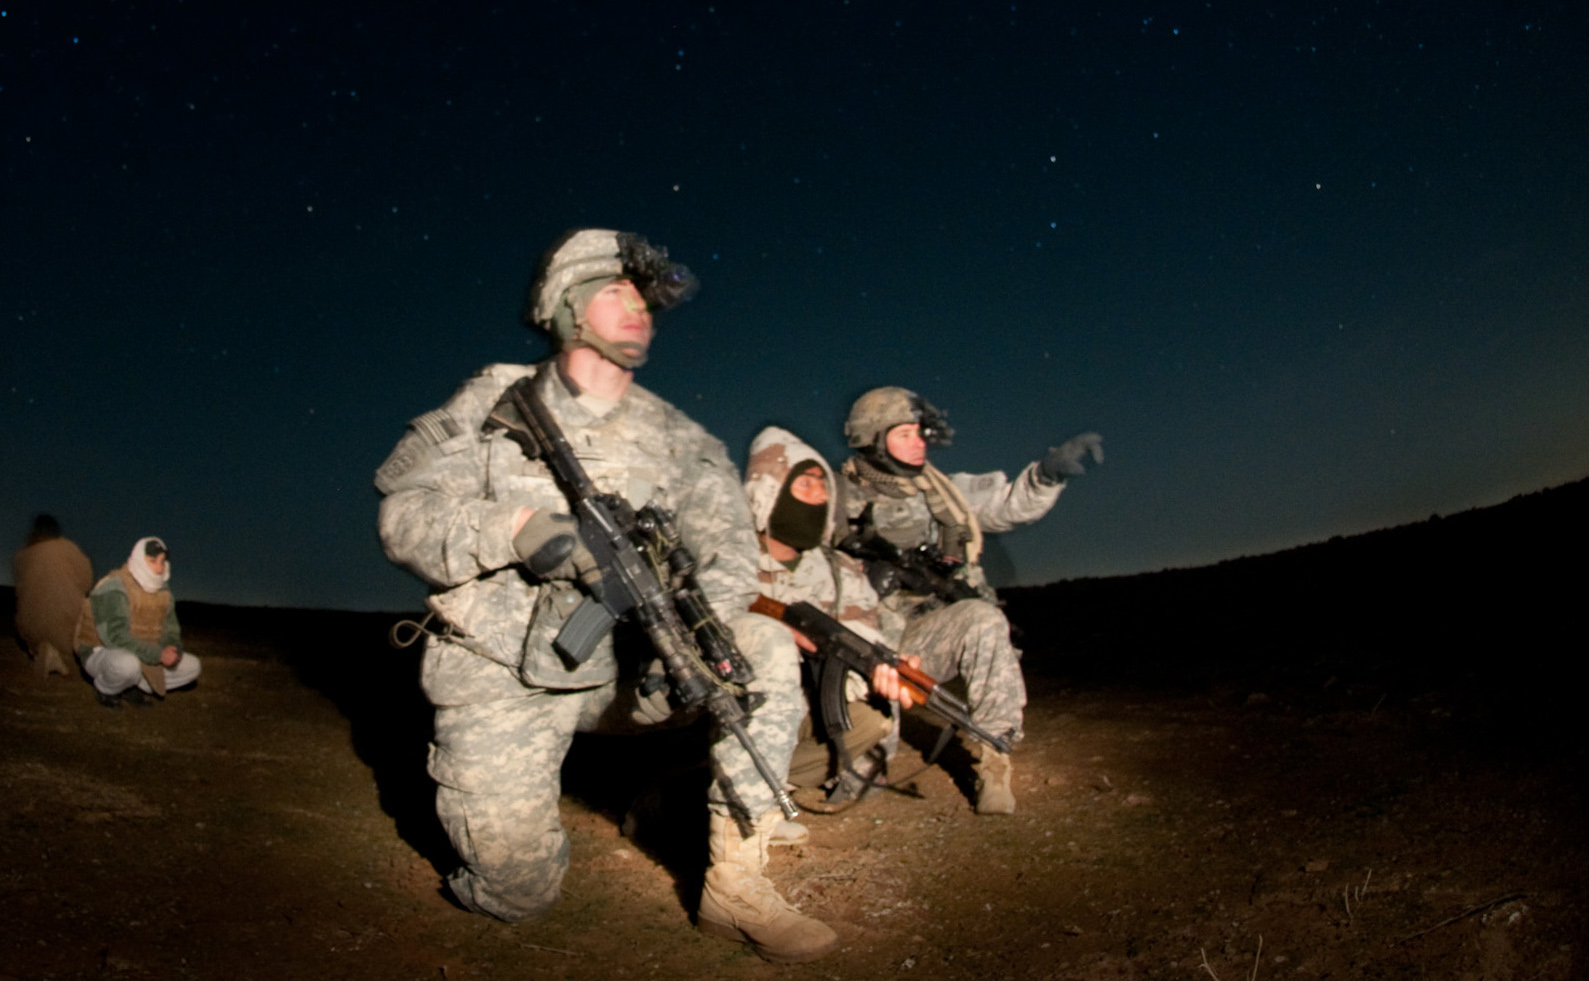 Haptic Vibrating Belts Guide U.S. Soldiers Through the Darkness